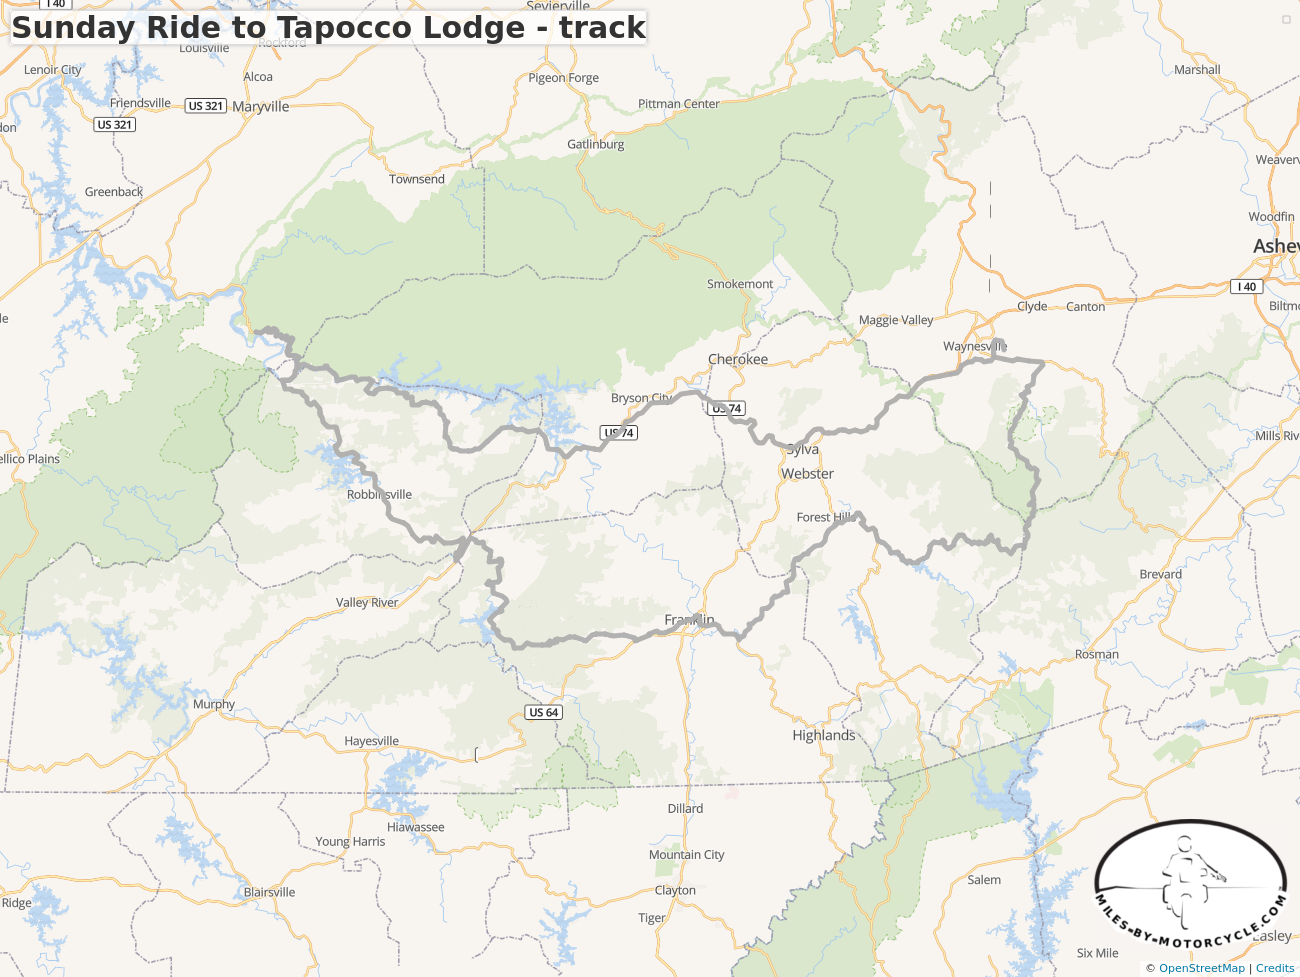 Sunday Ride to Tapocco Lodge - track